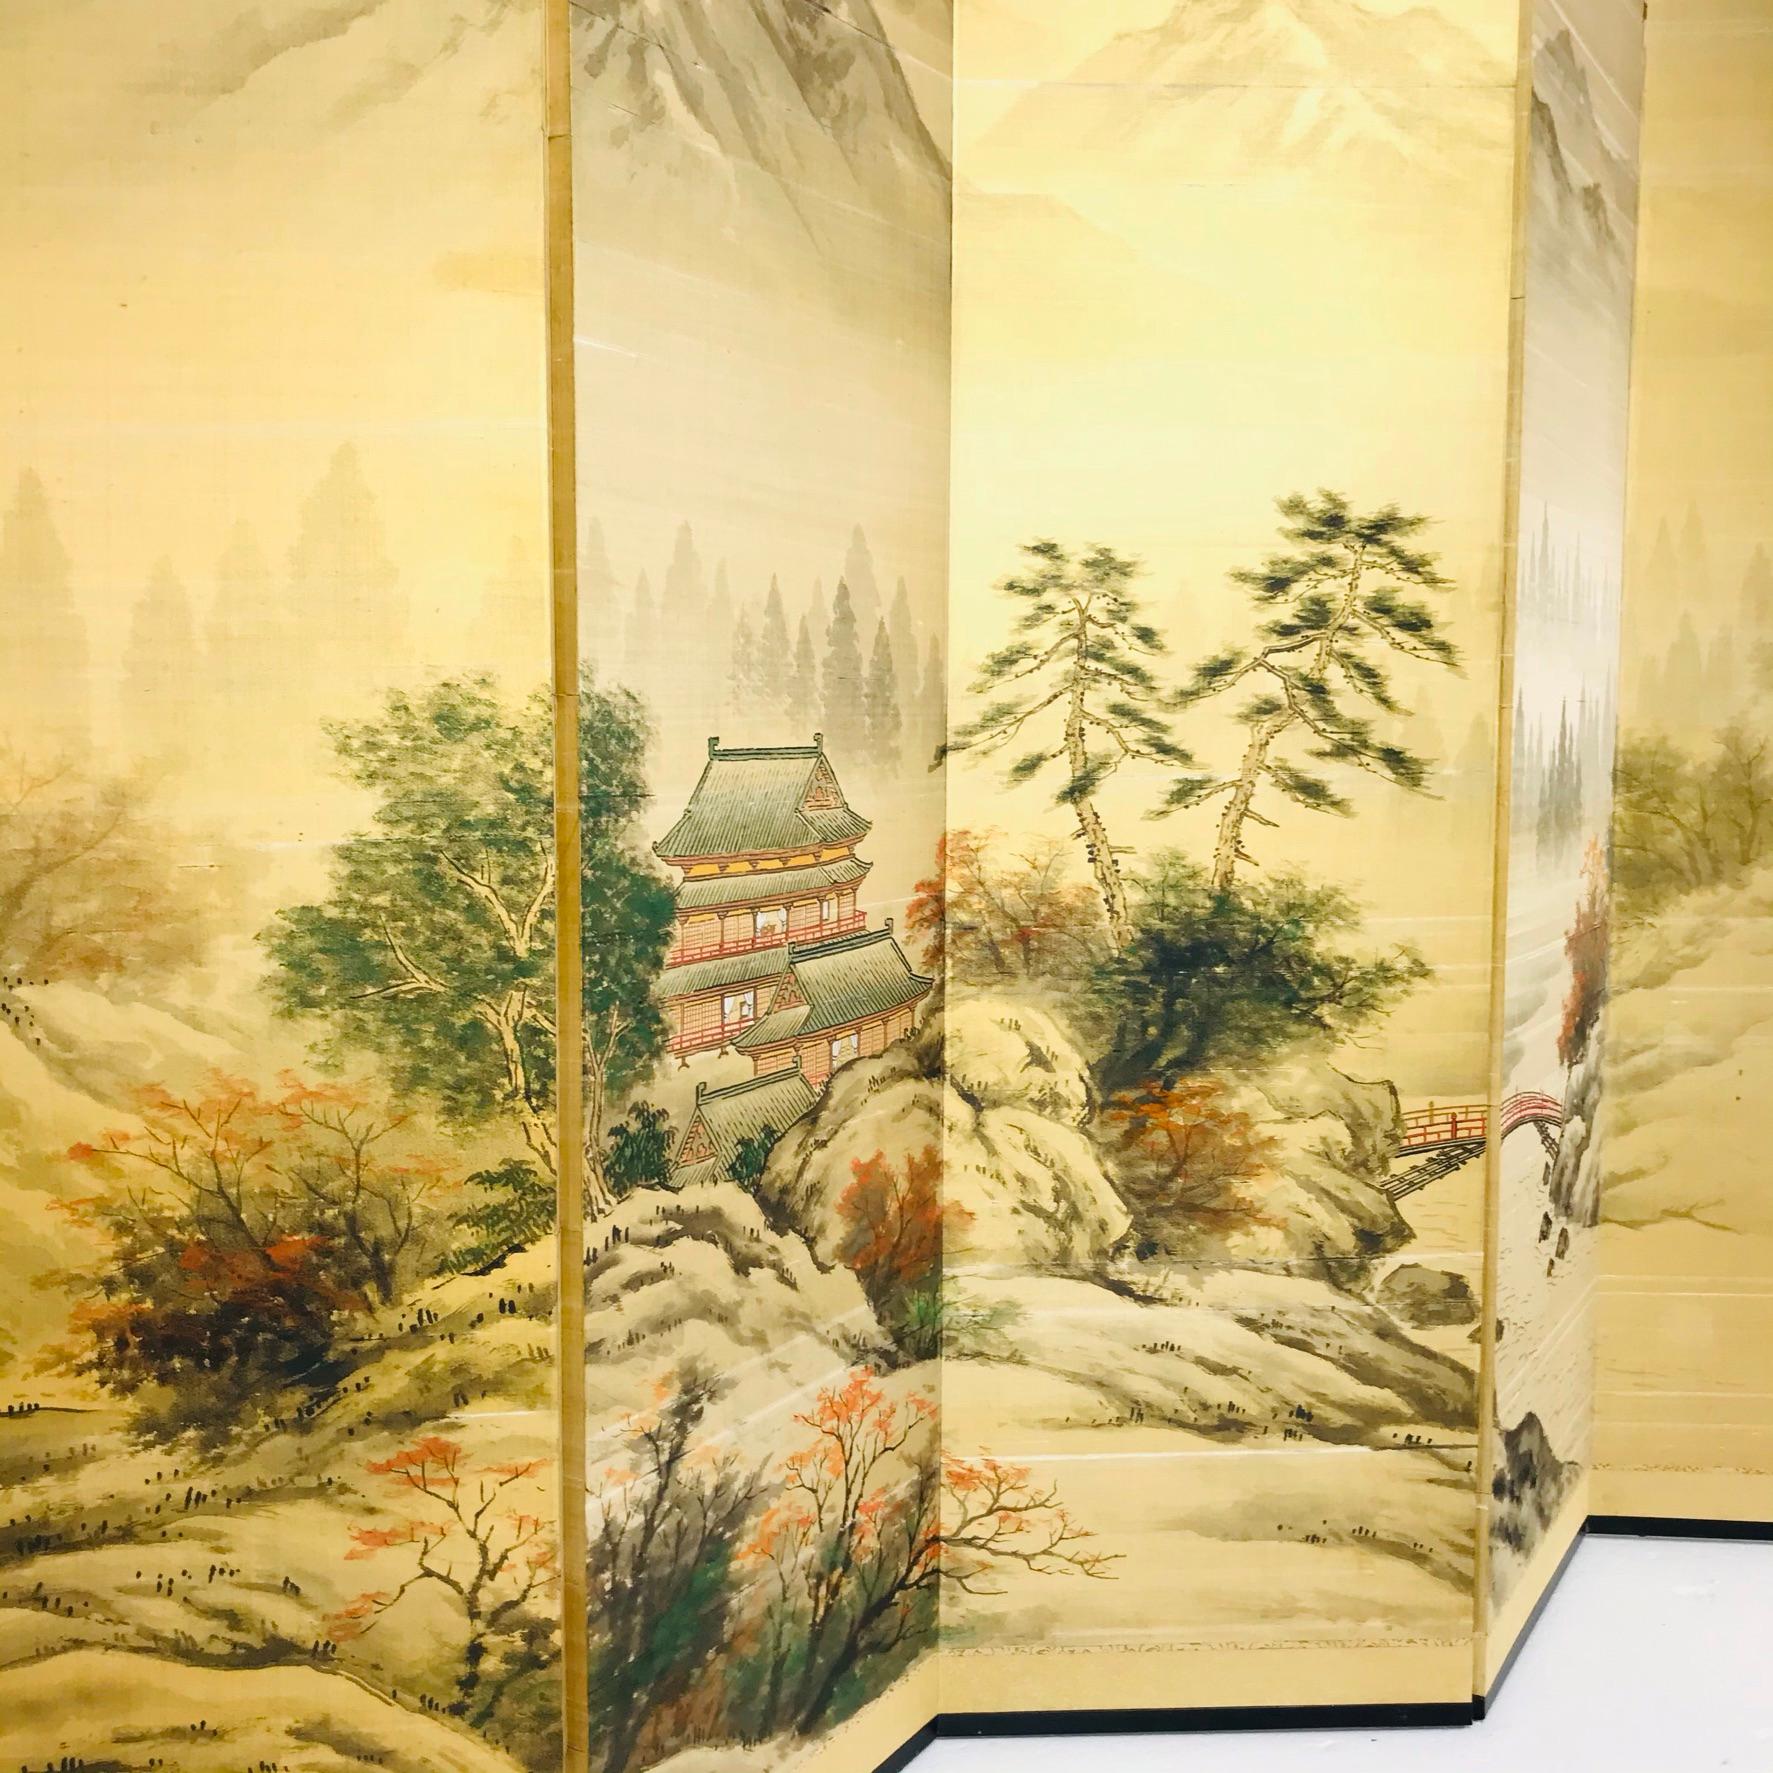 Beautiful early-mid 20th century 6 panel Japanese Byobu folding screen. It is signed and features hand applied painted scenes of cloudy mountains and trees in gold tones.

The corners and sides of the wooden frame have lovely hand hammered and